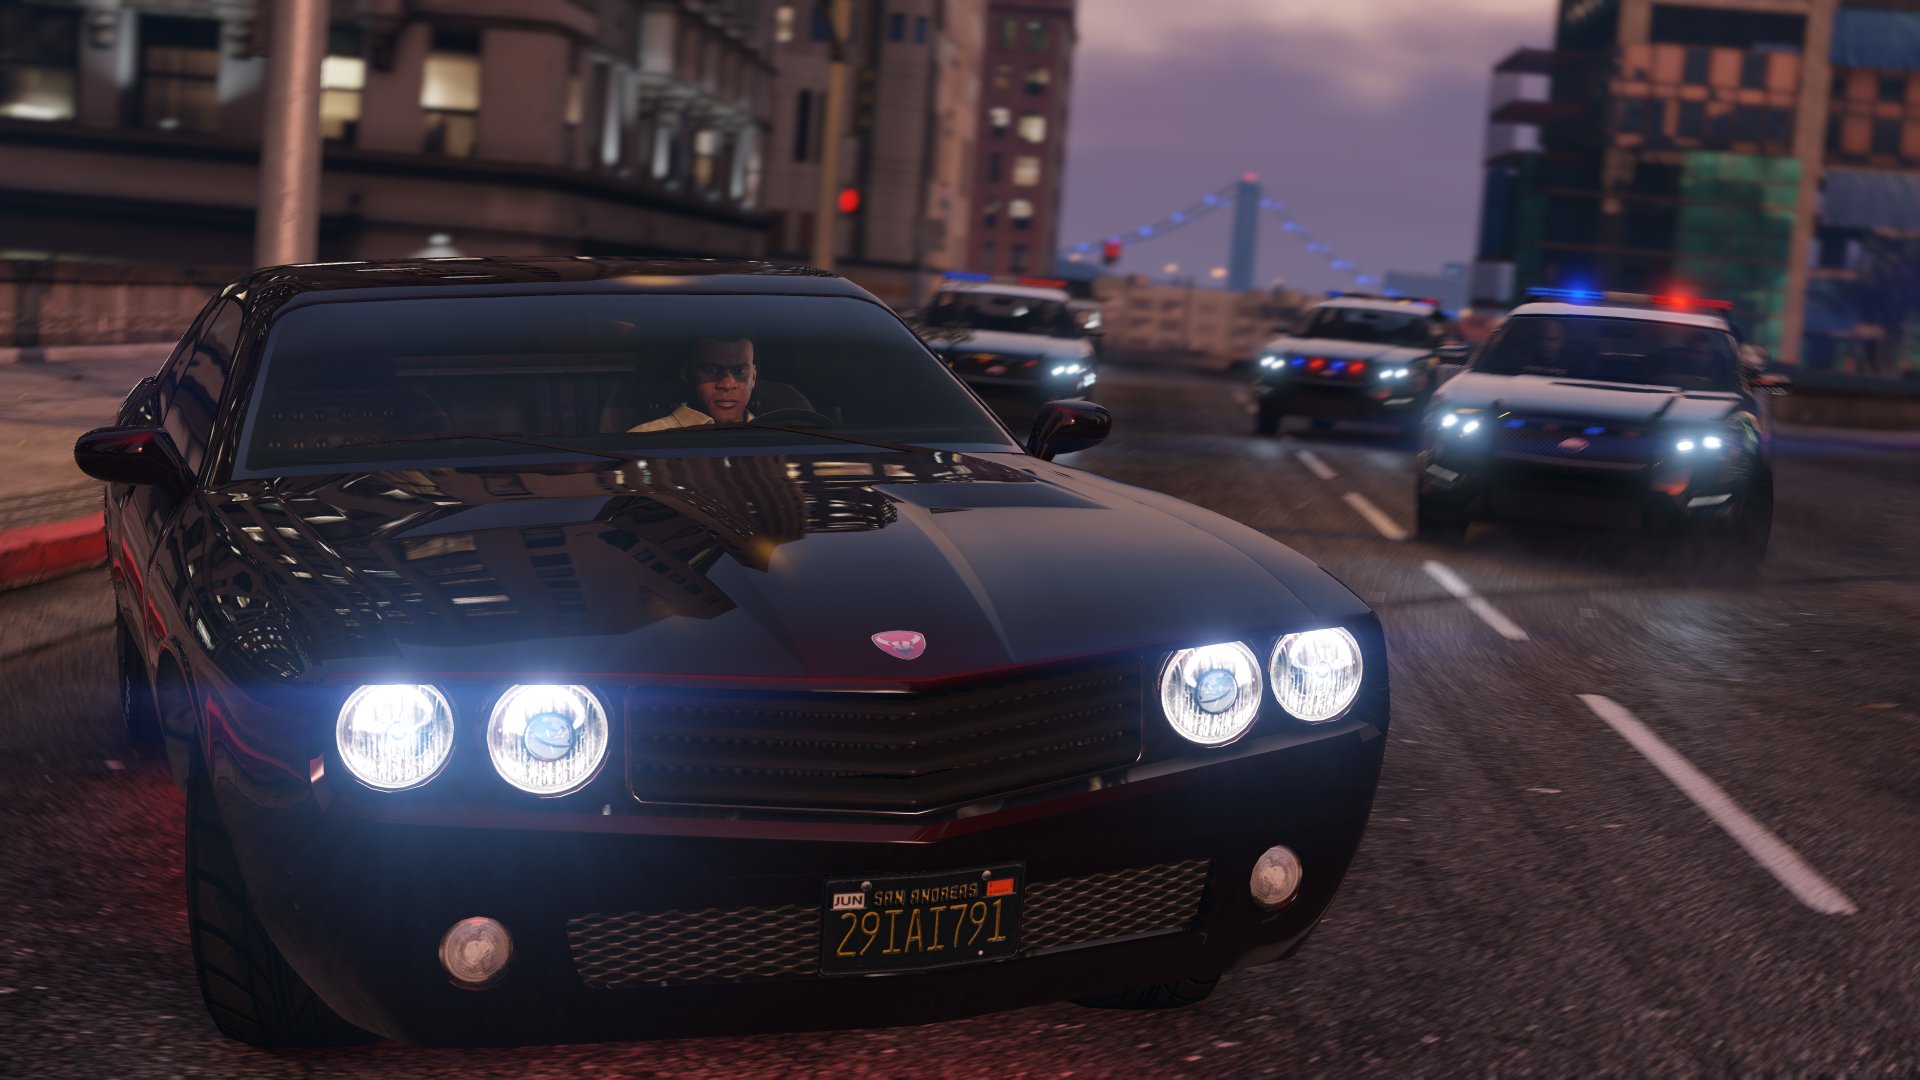 Video Game Art Video Game Heroes Grand Theft Auto V Video Games PC Gaming Car Vehicle Black Cars 1920x1080